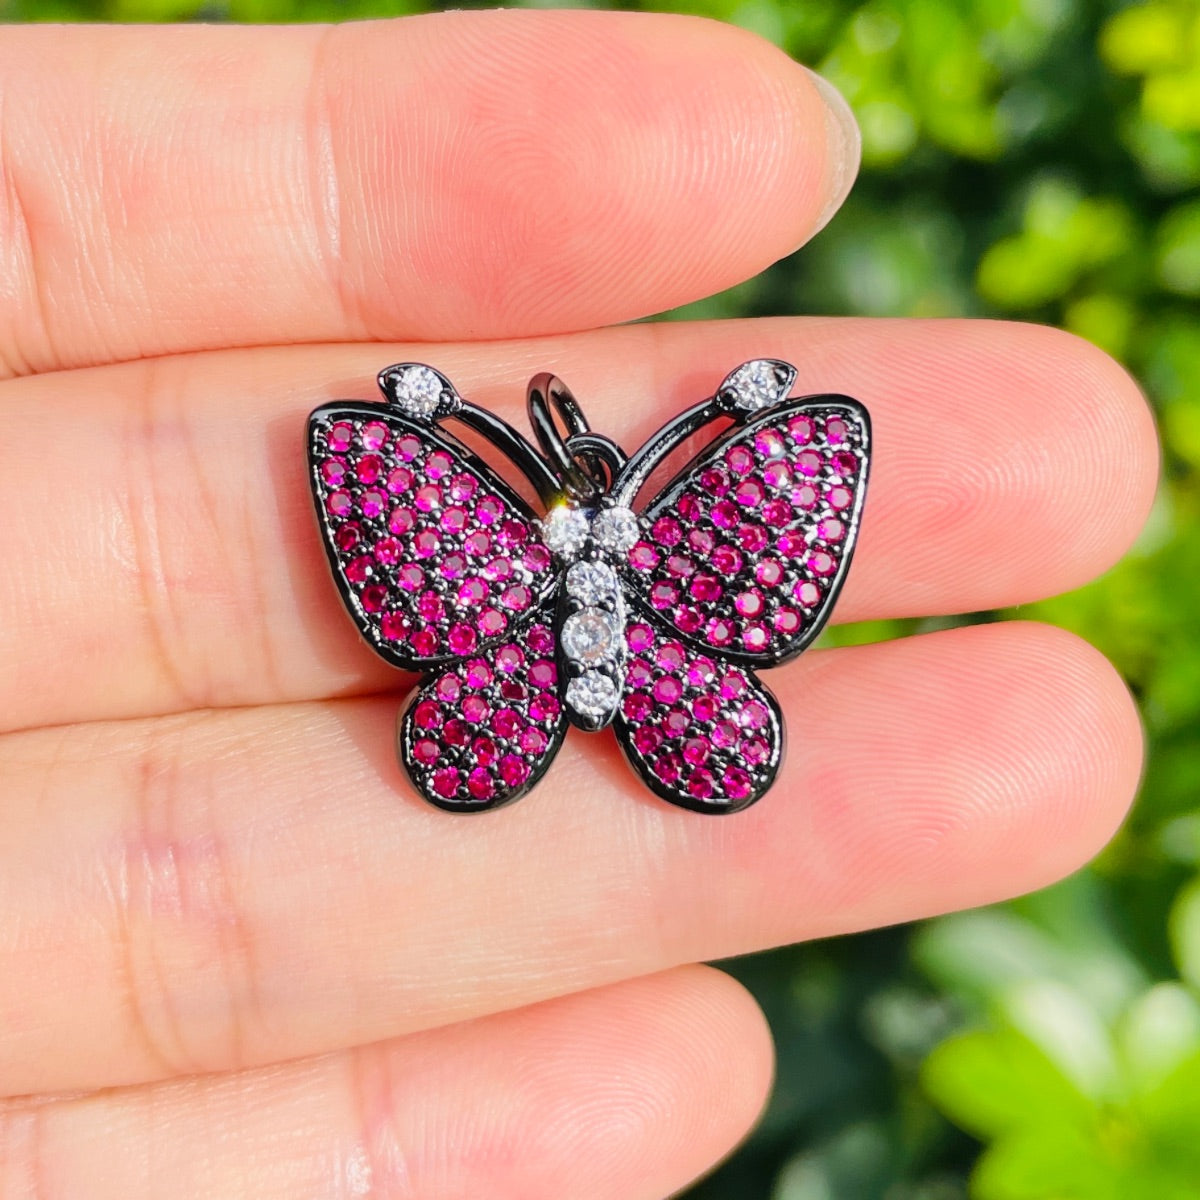 5pcs/lot 25*20mm Multicolor CZ Paved Butterfly Charms Fuchsia on Black CZ Paved Charms Butterflies Colorful Zirconia New Charms Arrivals Charms Beads Beyond